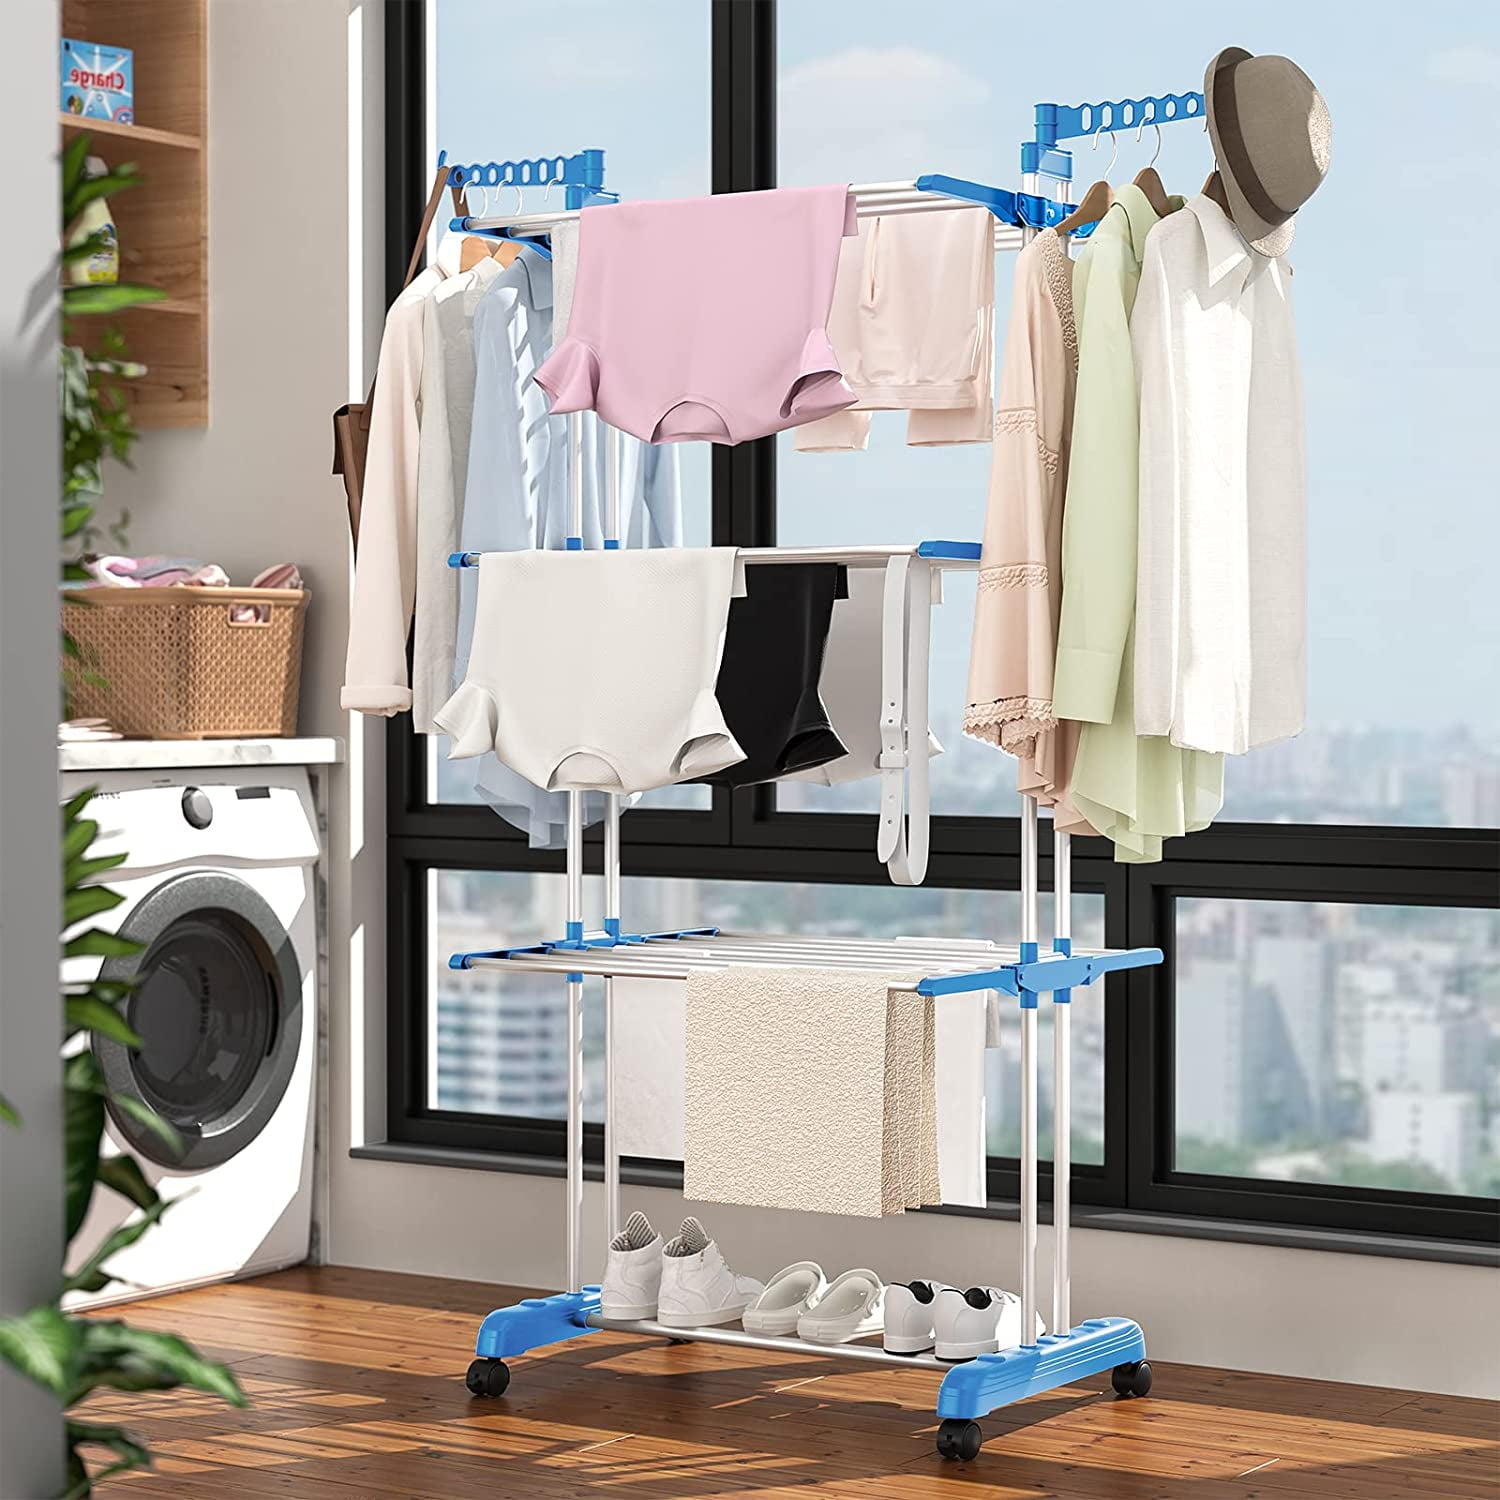 Clothes Drying Rack, Large 3-Tier Foldable Clothing Rail, Stainless